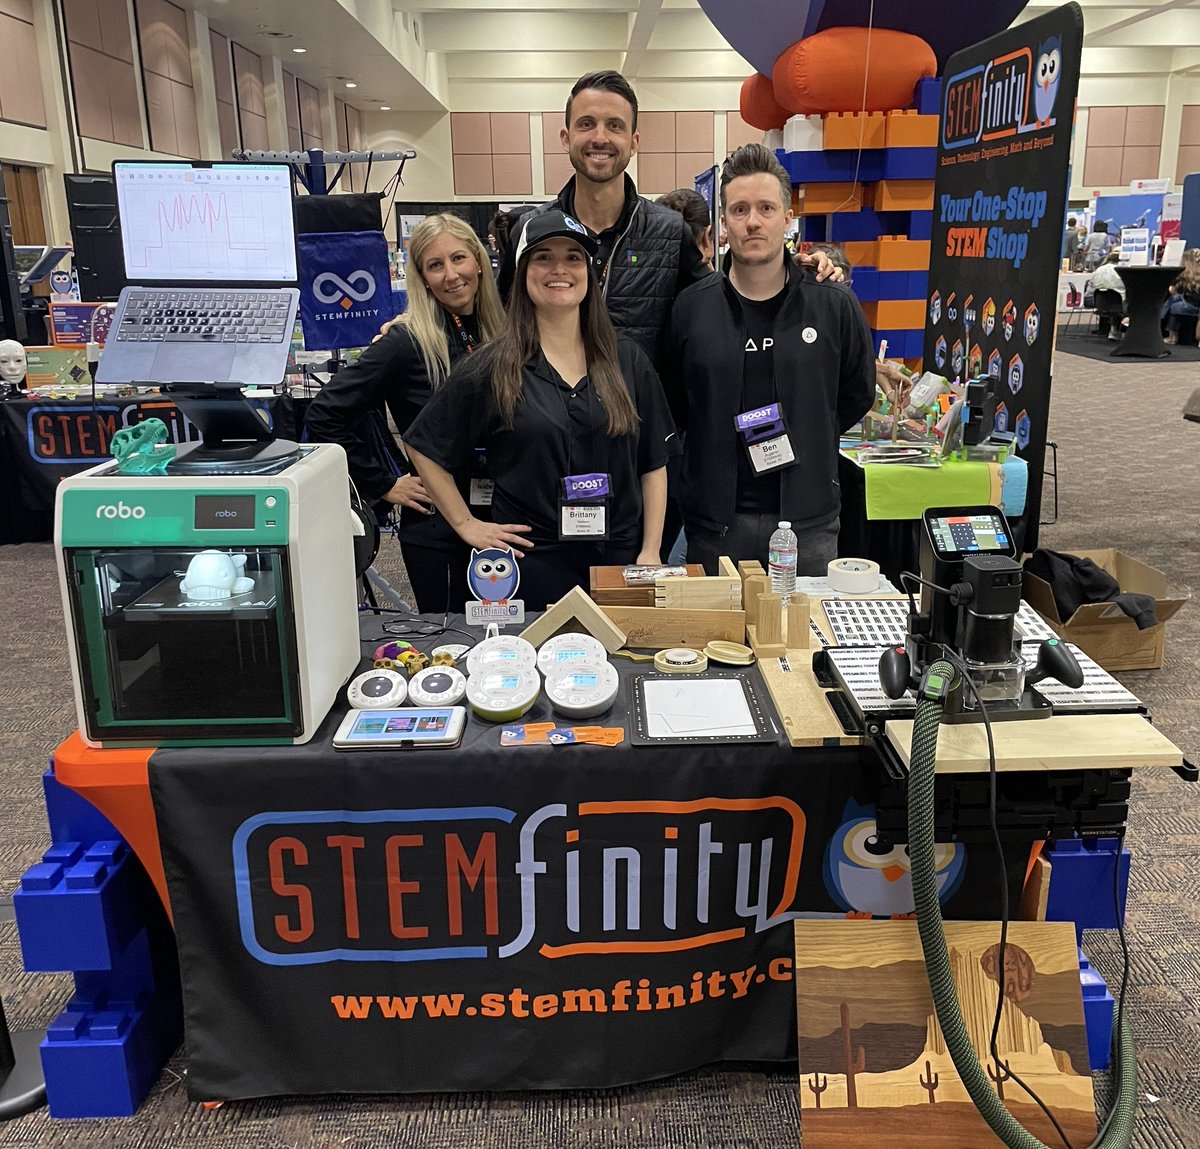 Our very own Braydon Moreno is hanging out with the STEMfinity Team at the #BOOST2024 Conference in Palm Springs, talking all things STEM!

Make sure to stop by and explore our #MimioSTEM solutions like our Robo #3Dprinters and #Labdisc!

@STEMfinity @TEAMBOOST @boxlightinc